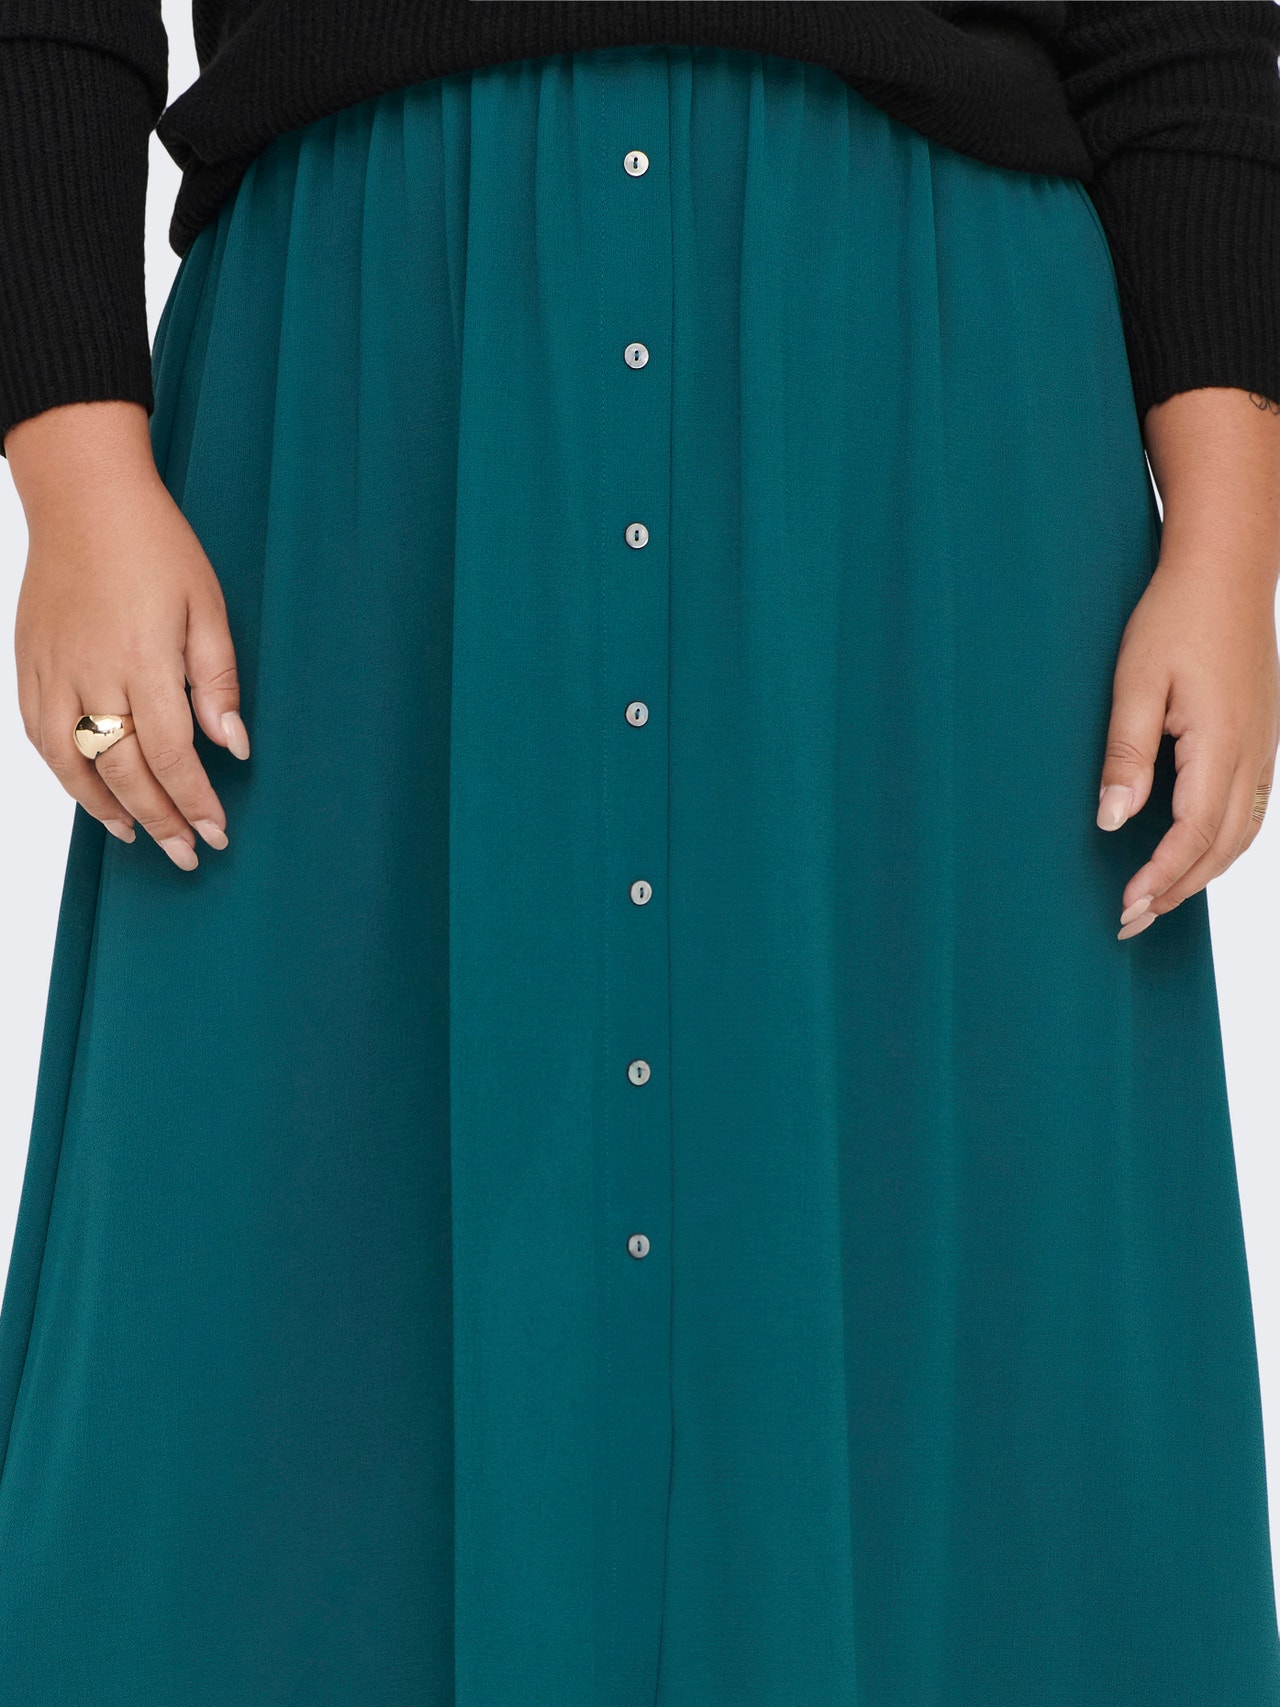 ONLY Jupe longue -Deep Teal - 15251111